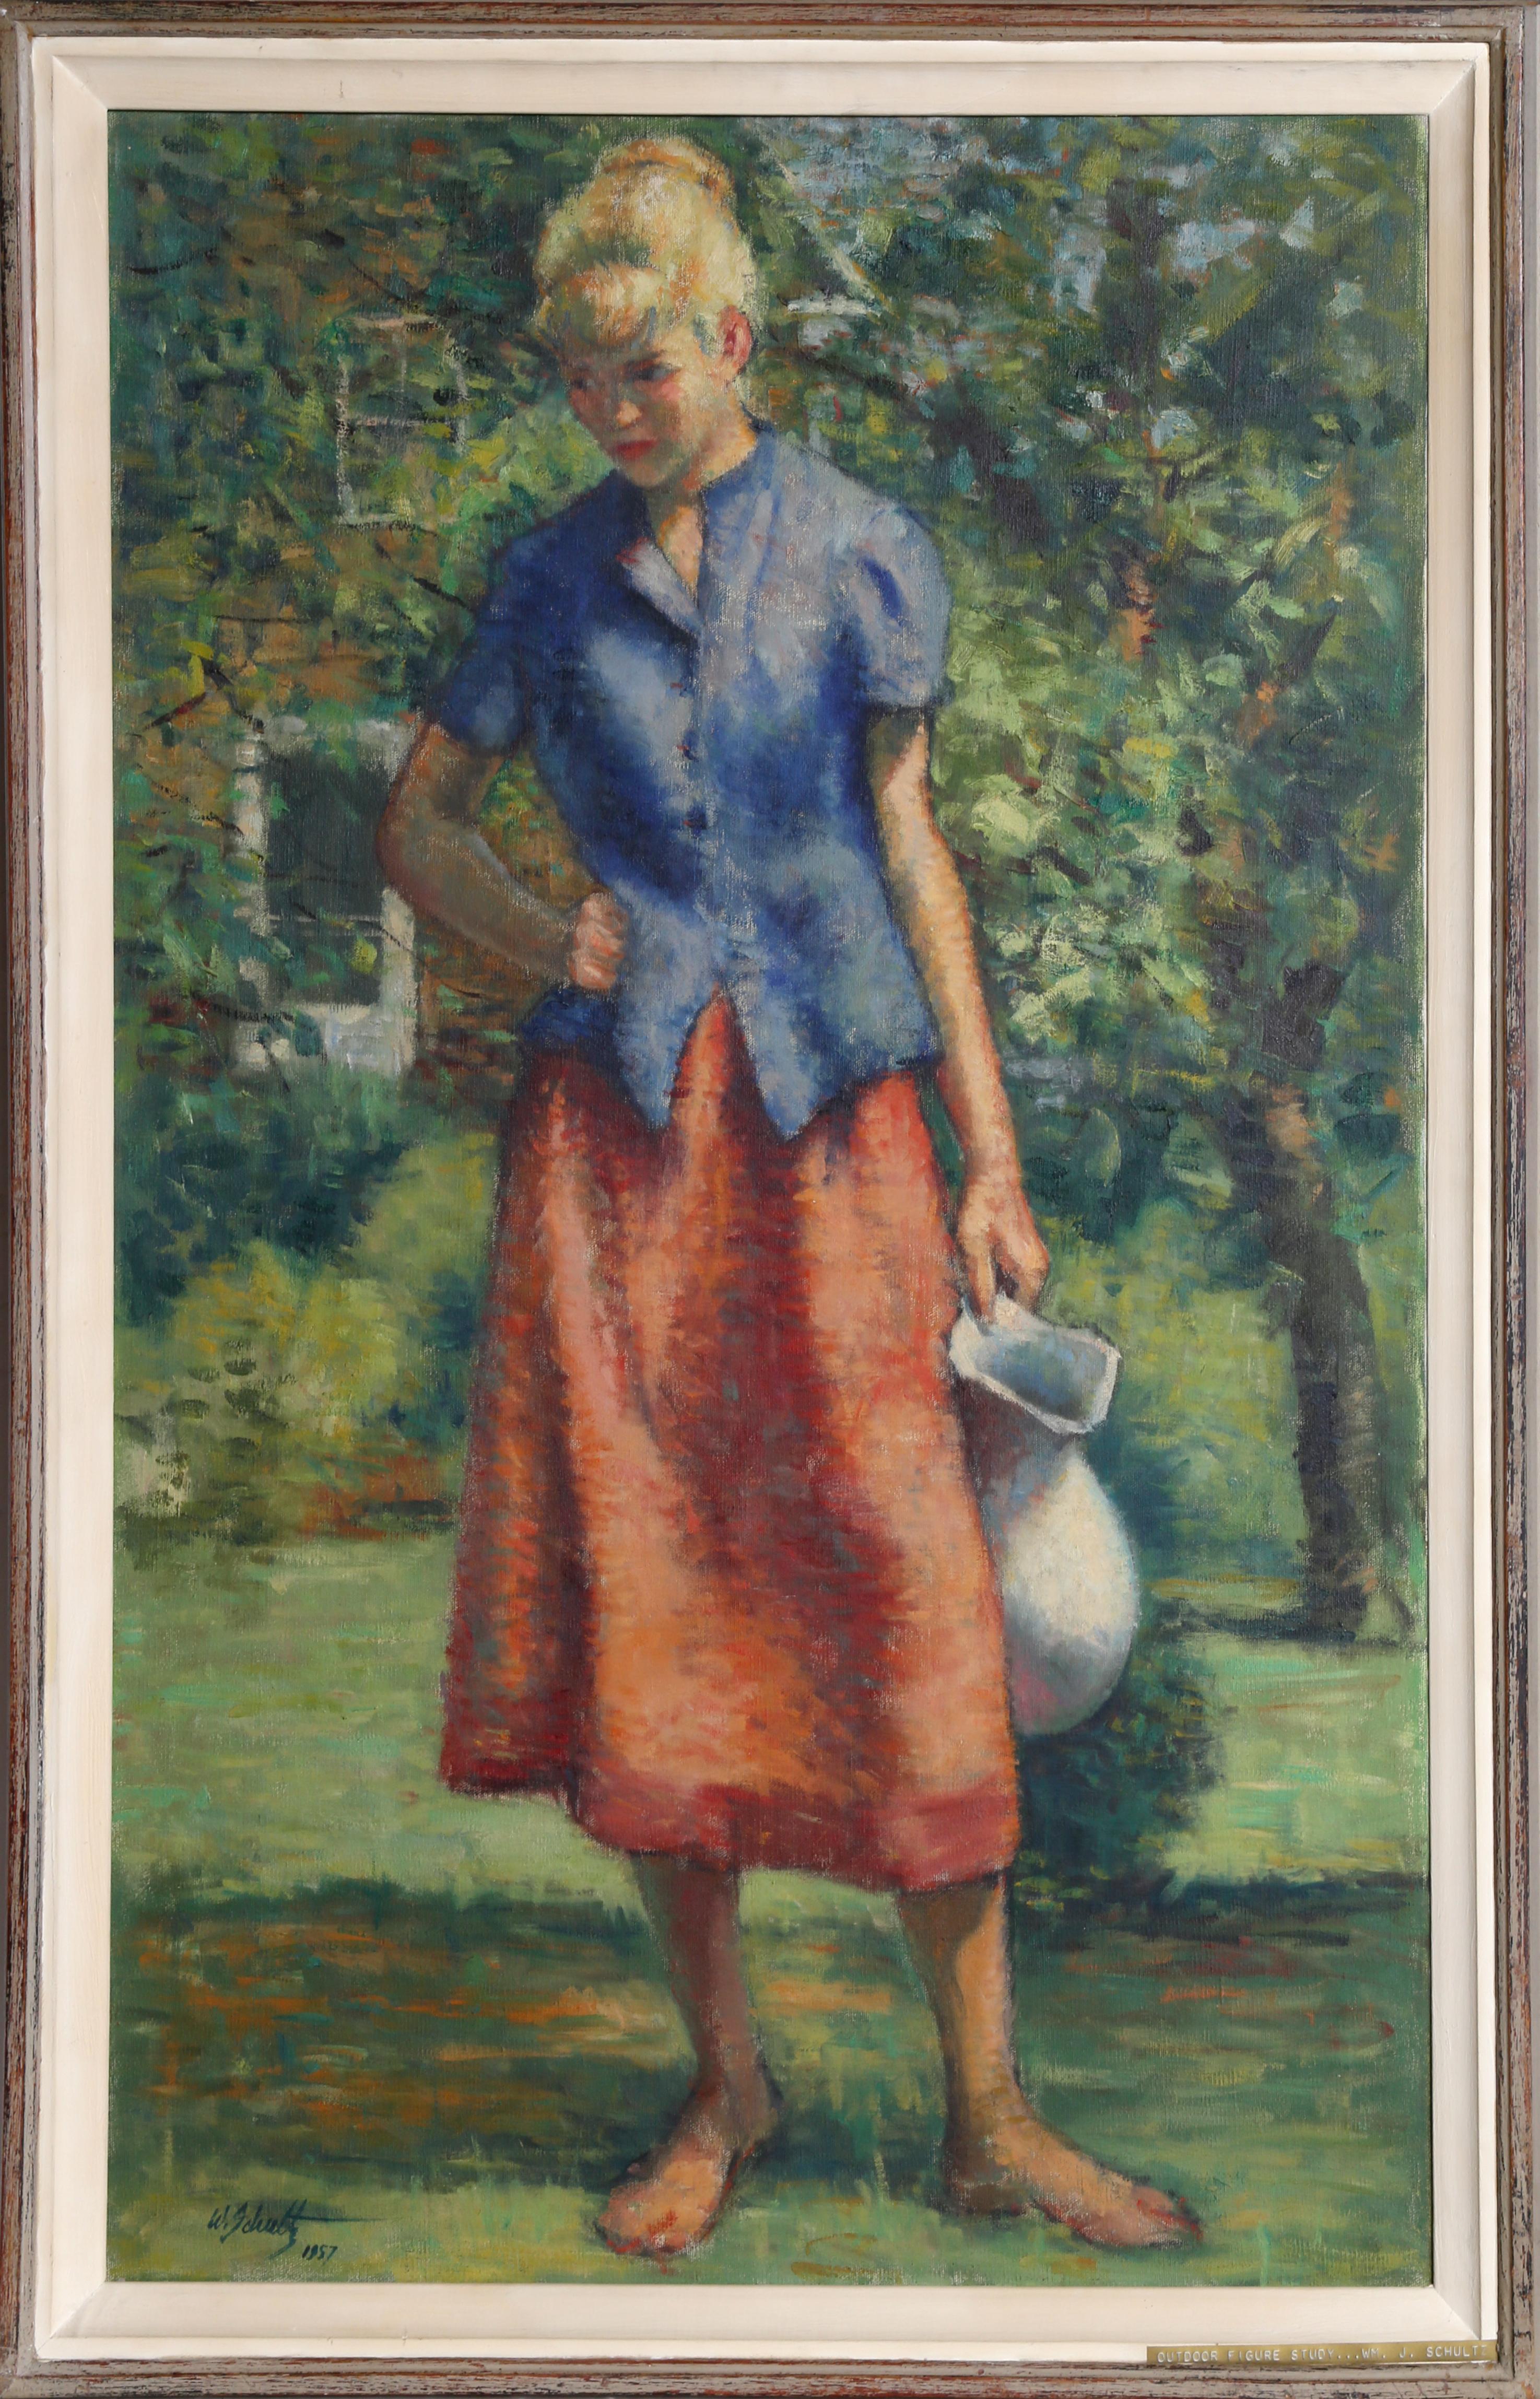 Outdoor Figure Study, Oil Painting by William J. Schultz